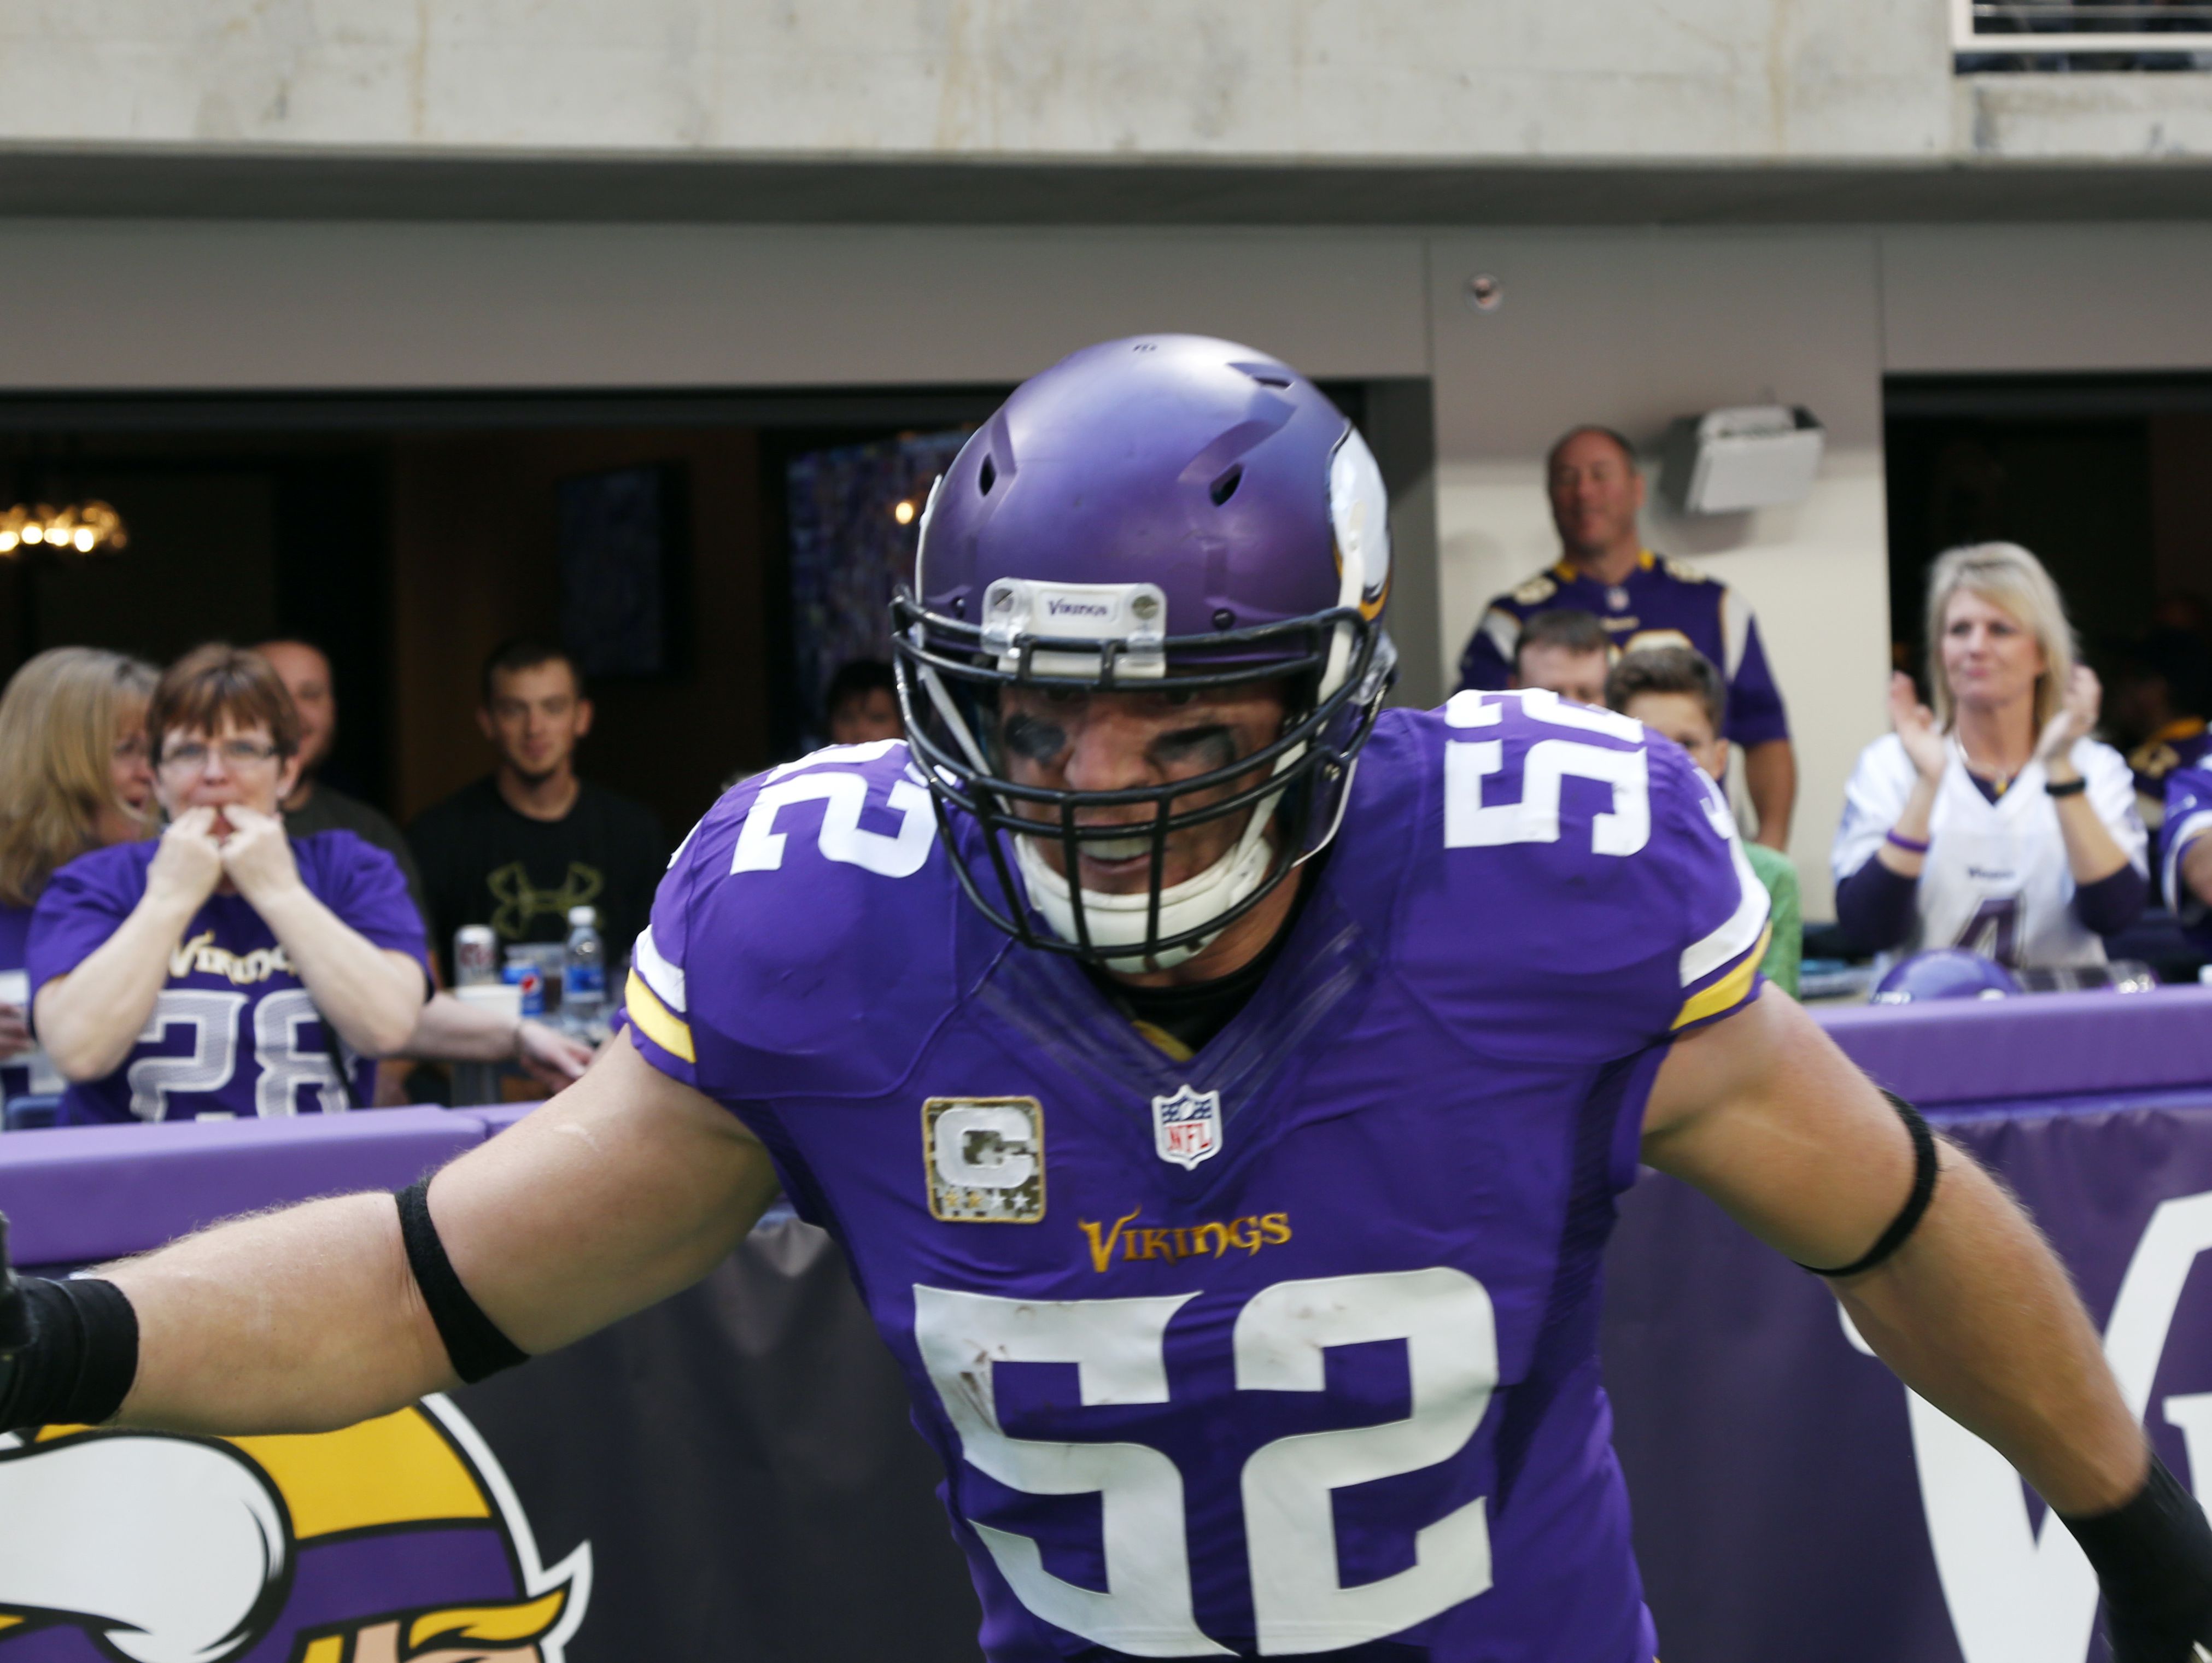 Minnesota Vikings linebacker and Mount Vernon native Chad Greenway was tabbed South Dakota's Celebrity Athlete of the Year for 2016.